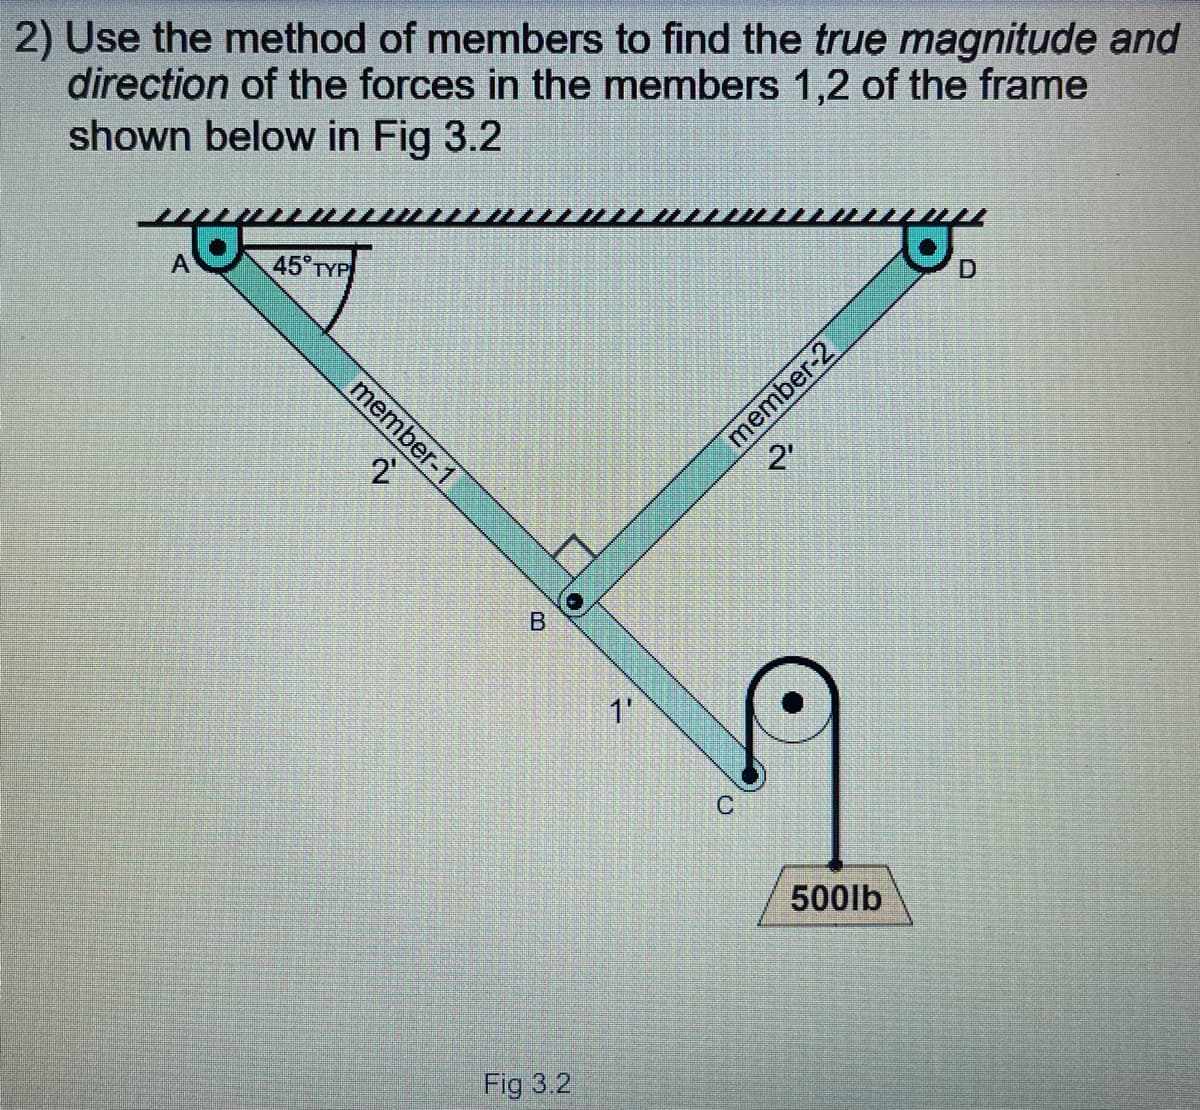 2) Use the method of members to find the true magnitude and
direction of the forces in the members 1,2 of the frame
shown below in Fig 3.2
A
45° TYP
member-1
2'
1'
500lb
Fig 3.2
member-2
B.
